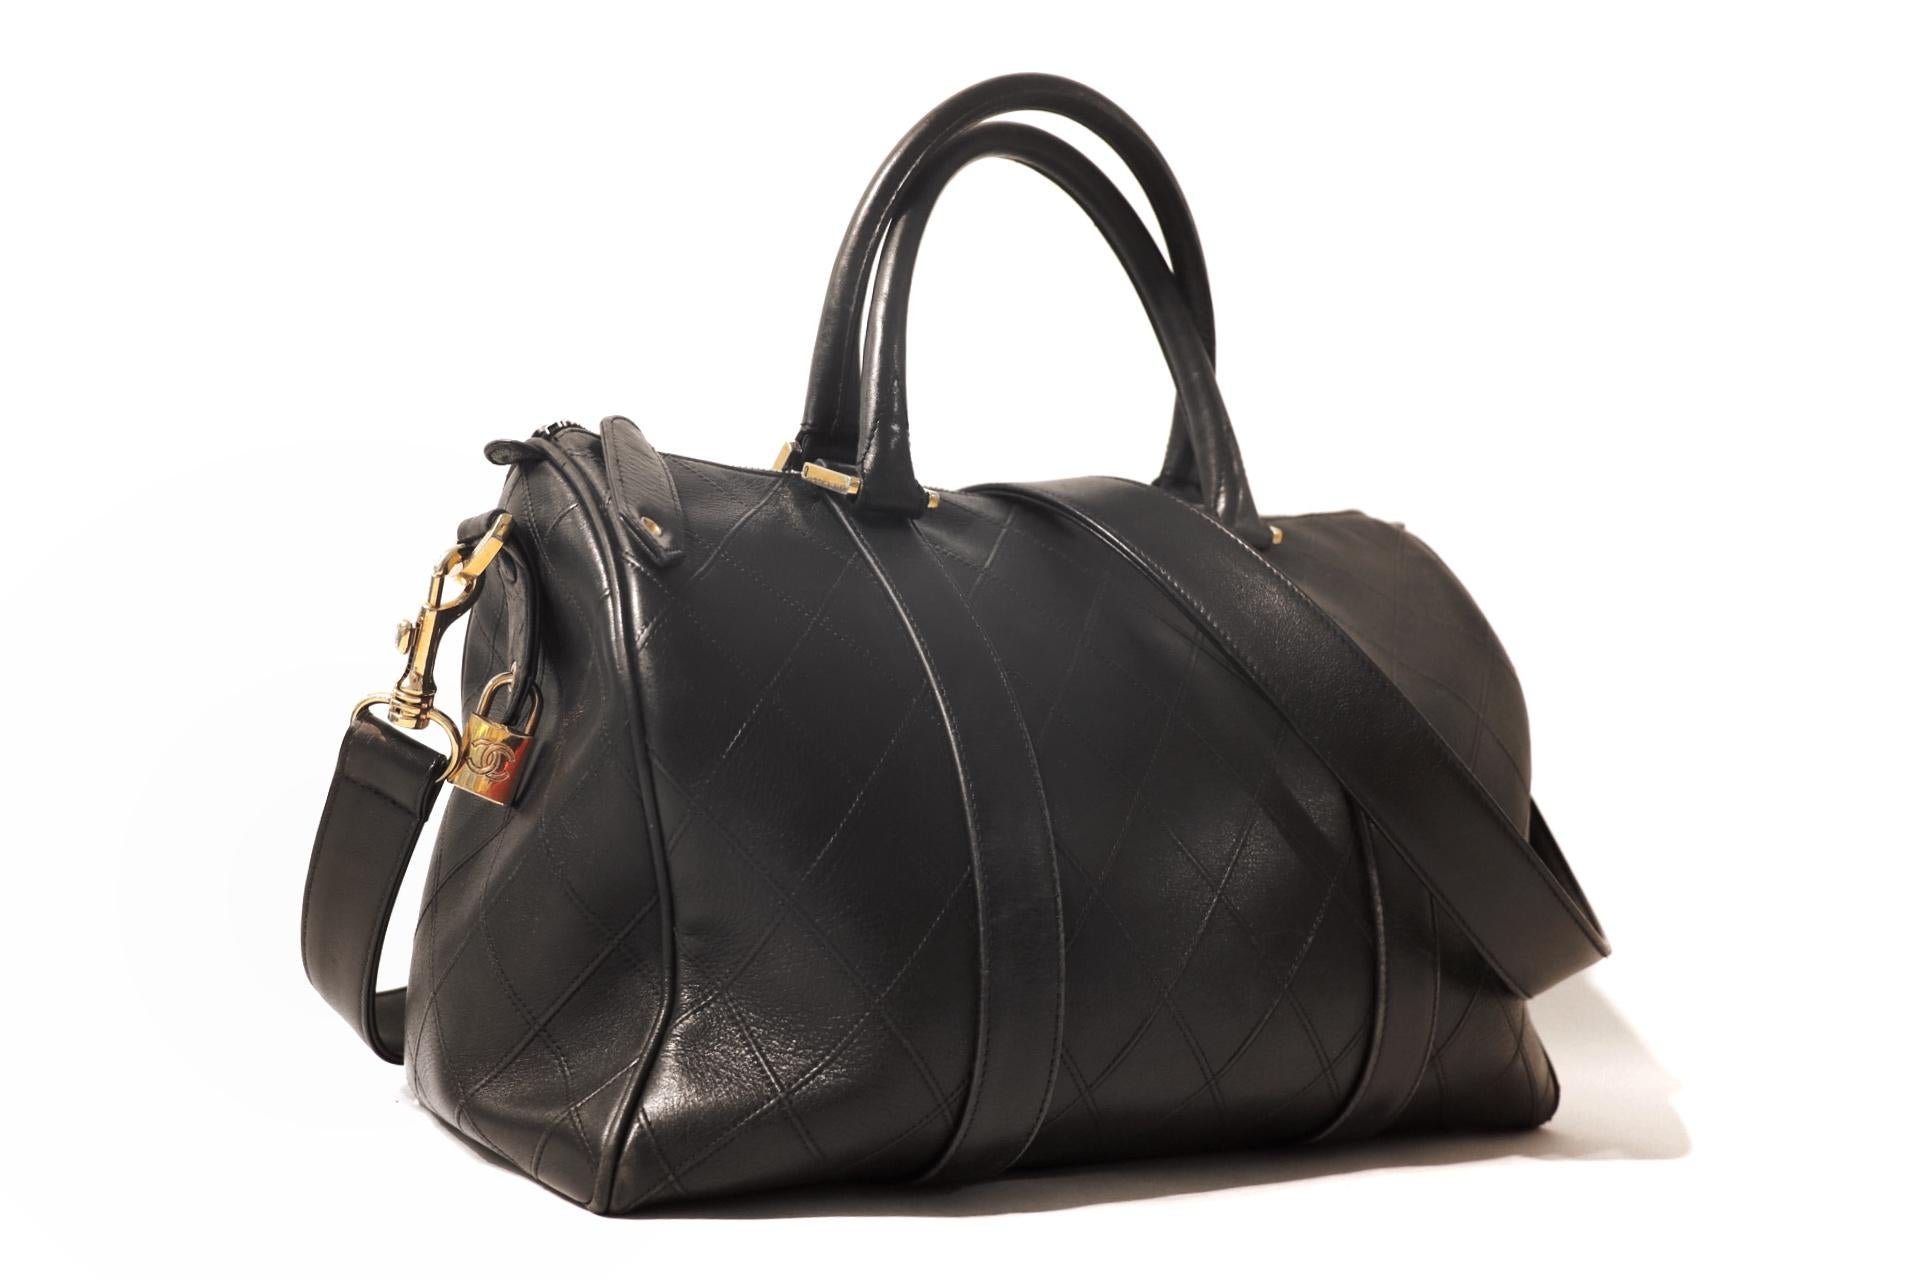 This authentic Chanel Black Leather Vintage Speedy Bag is in excellent condition.  A timeless piece from the early 1990’s, it has maintained its status as a true classic.  
Black leather duffel style handbag is flat stitched in signature Chanel